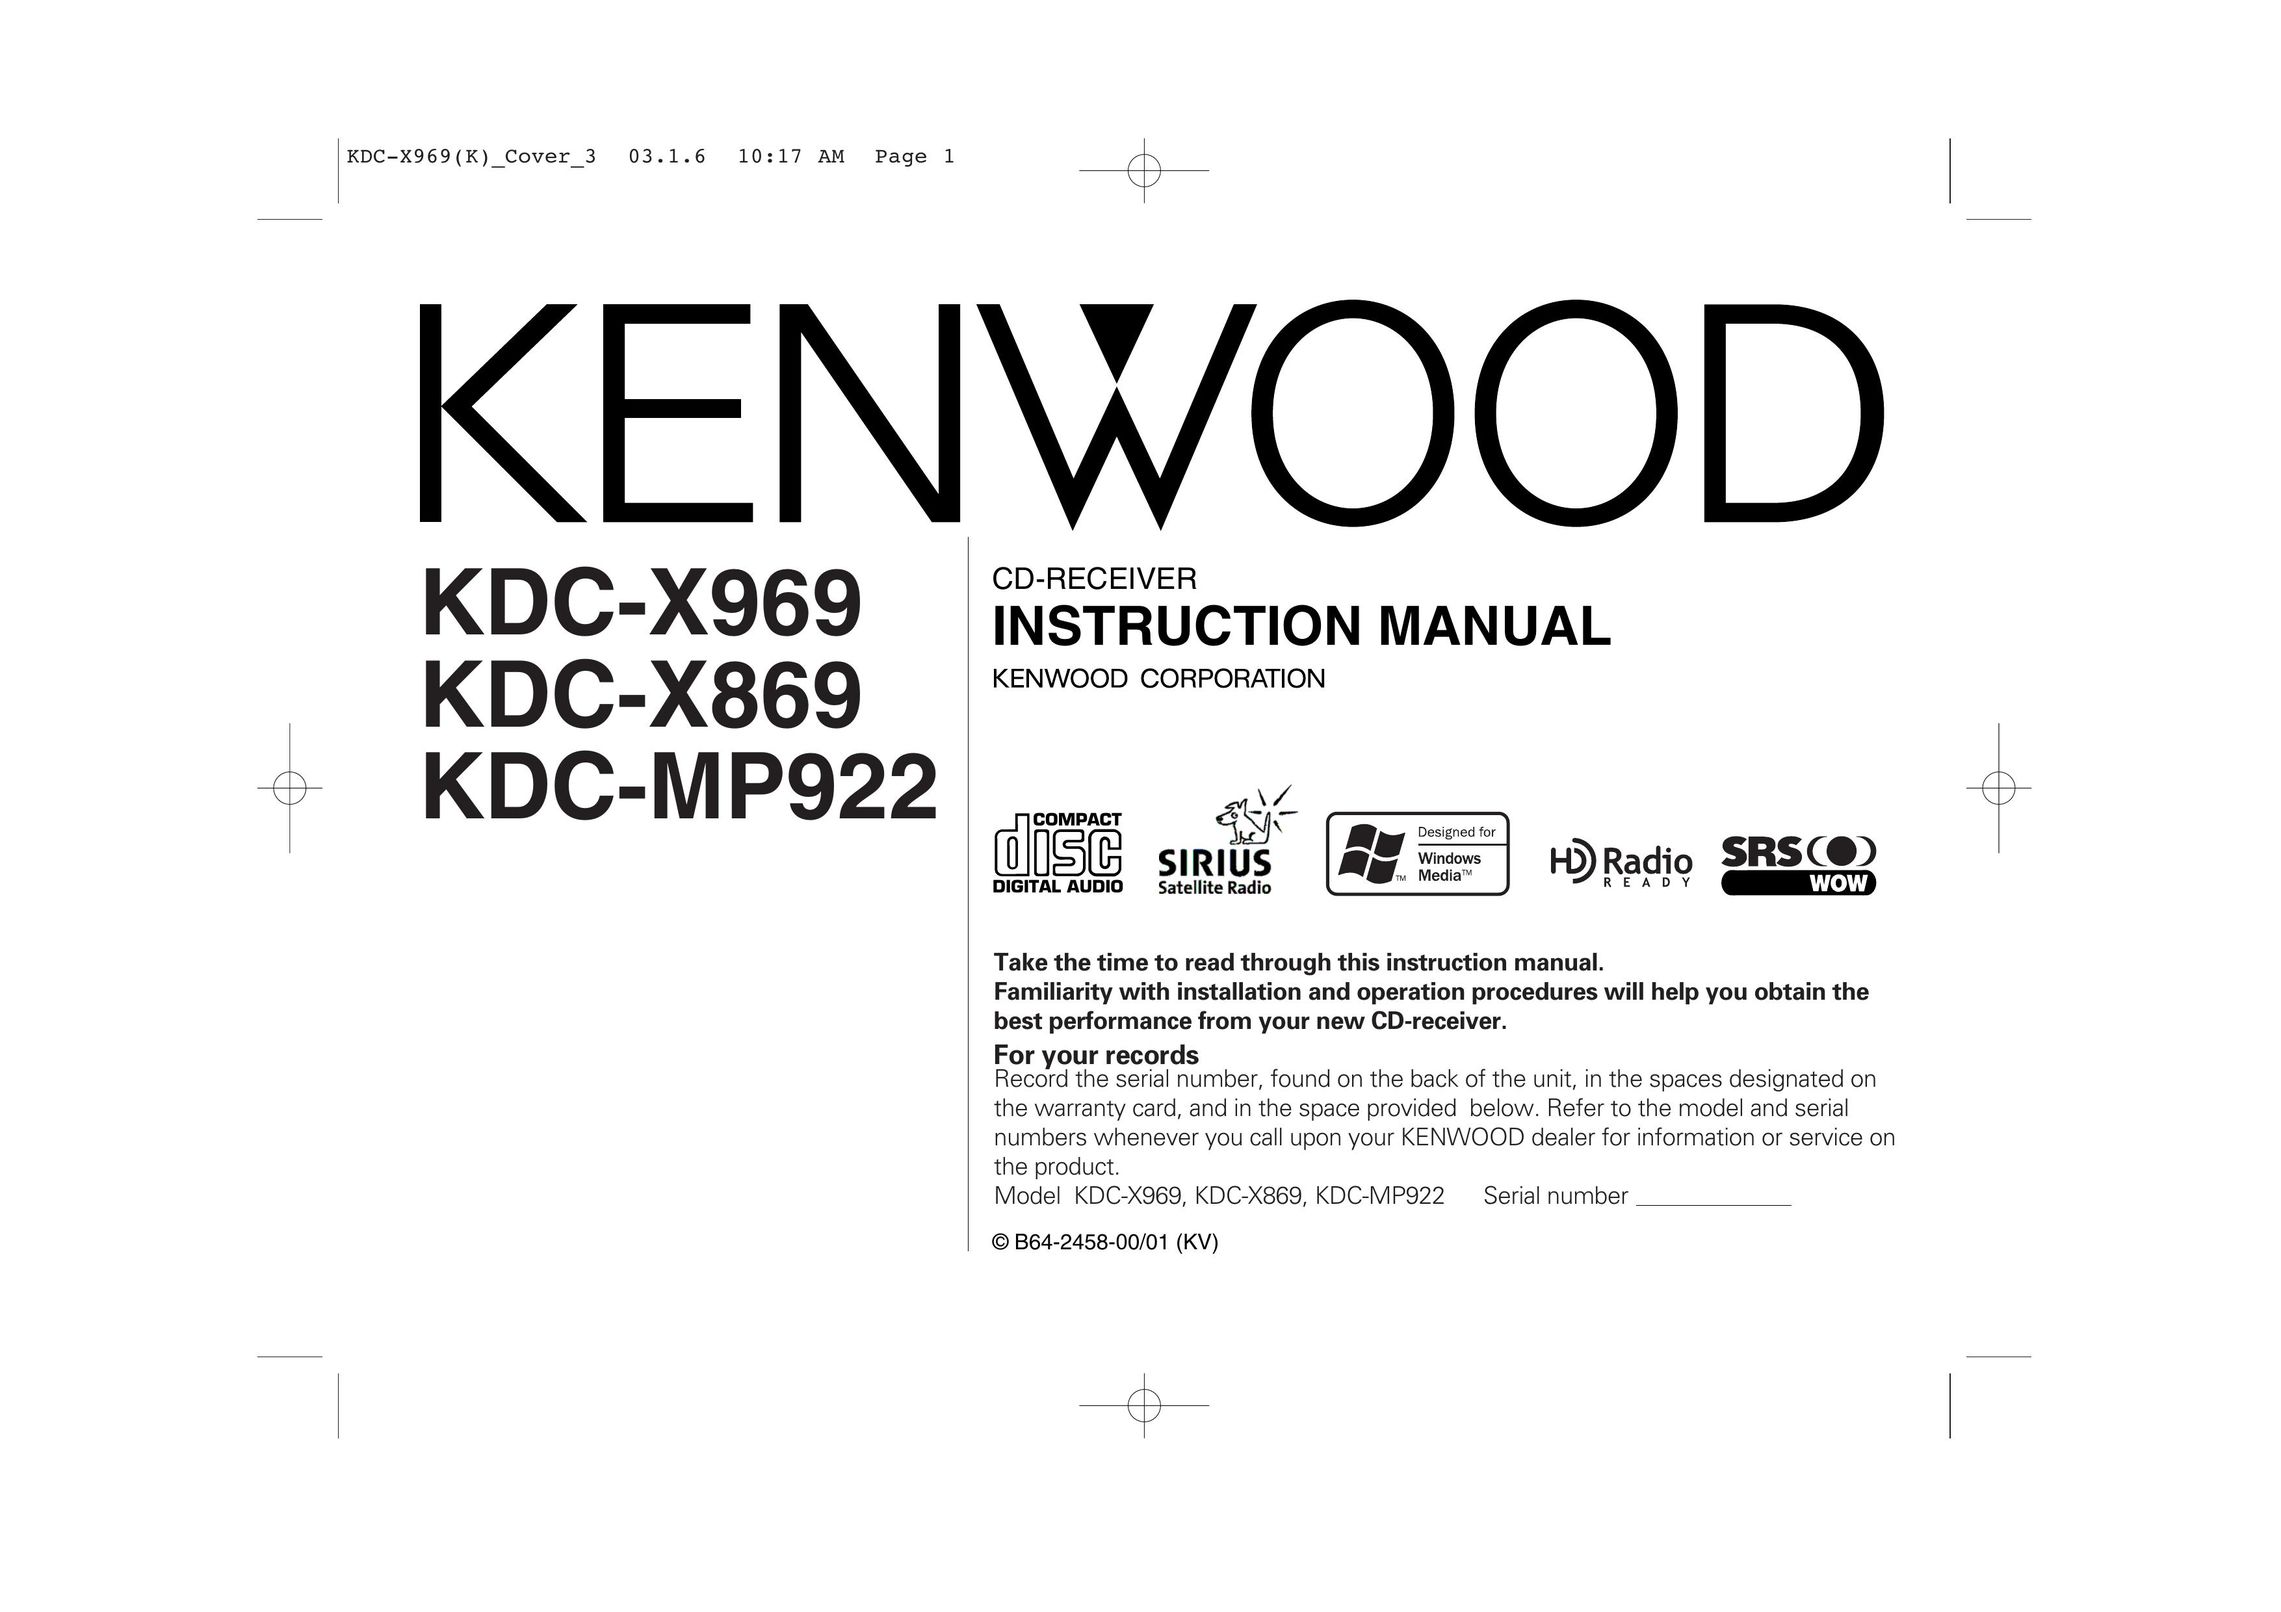 Kenwood KDC-X969 Stereo Receiver User Manual